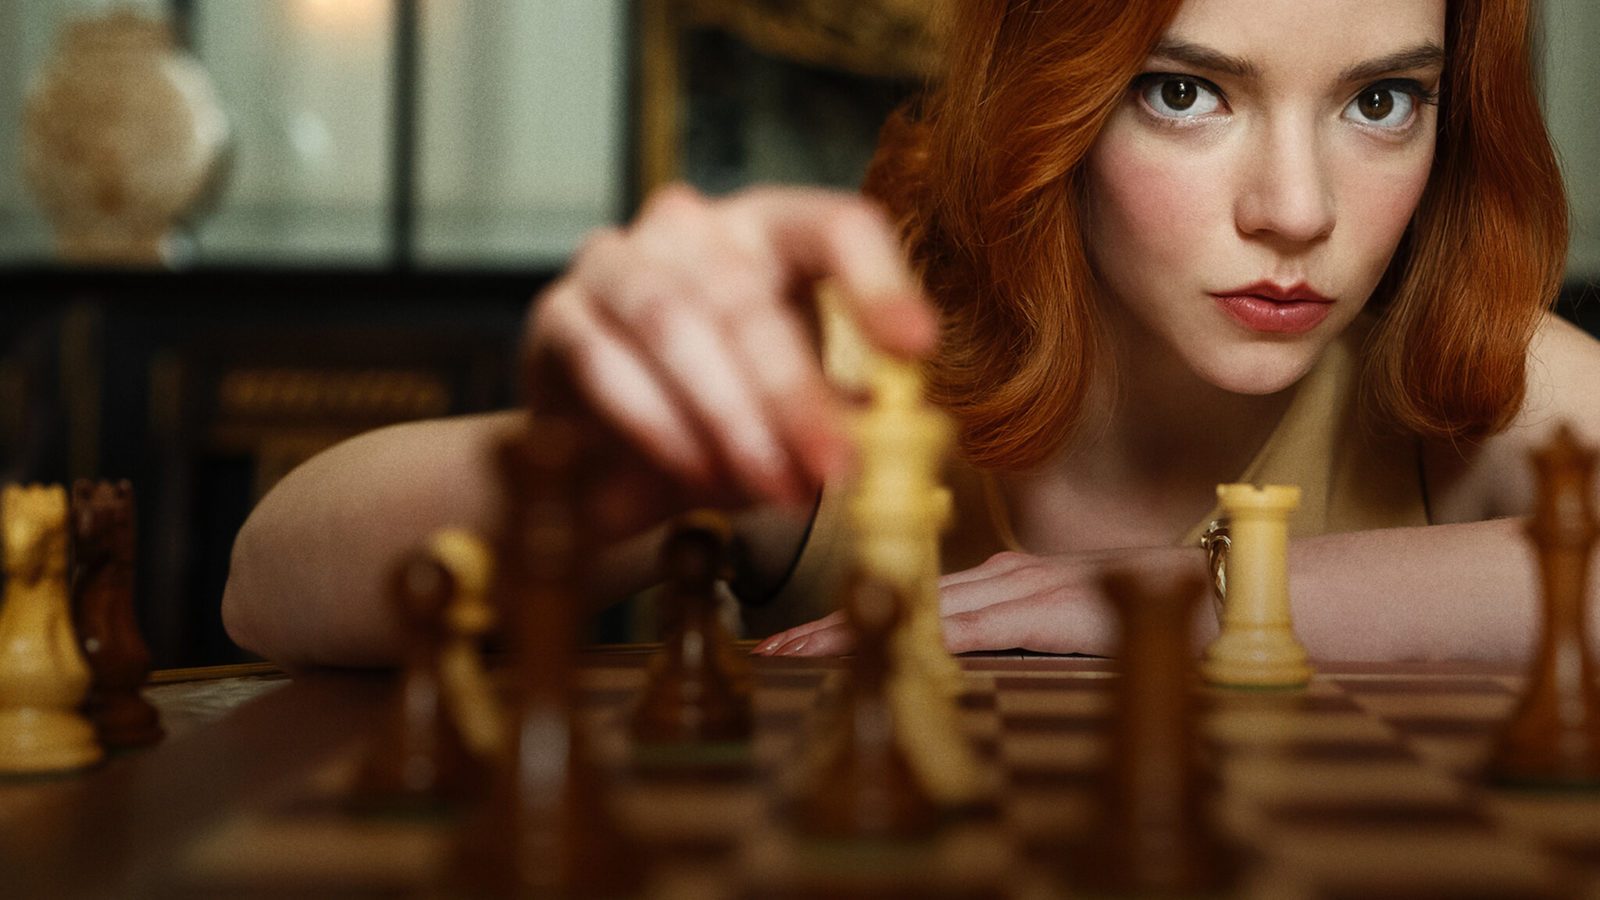 What We're Watching: The Queen's Gambit | With Love Darling